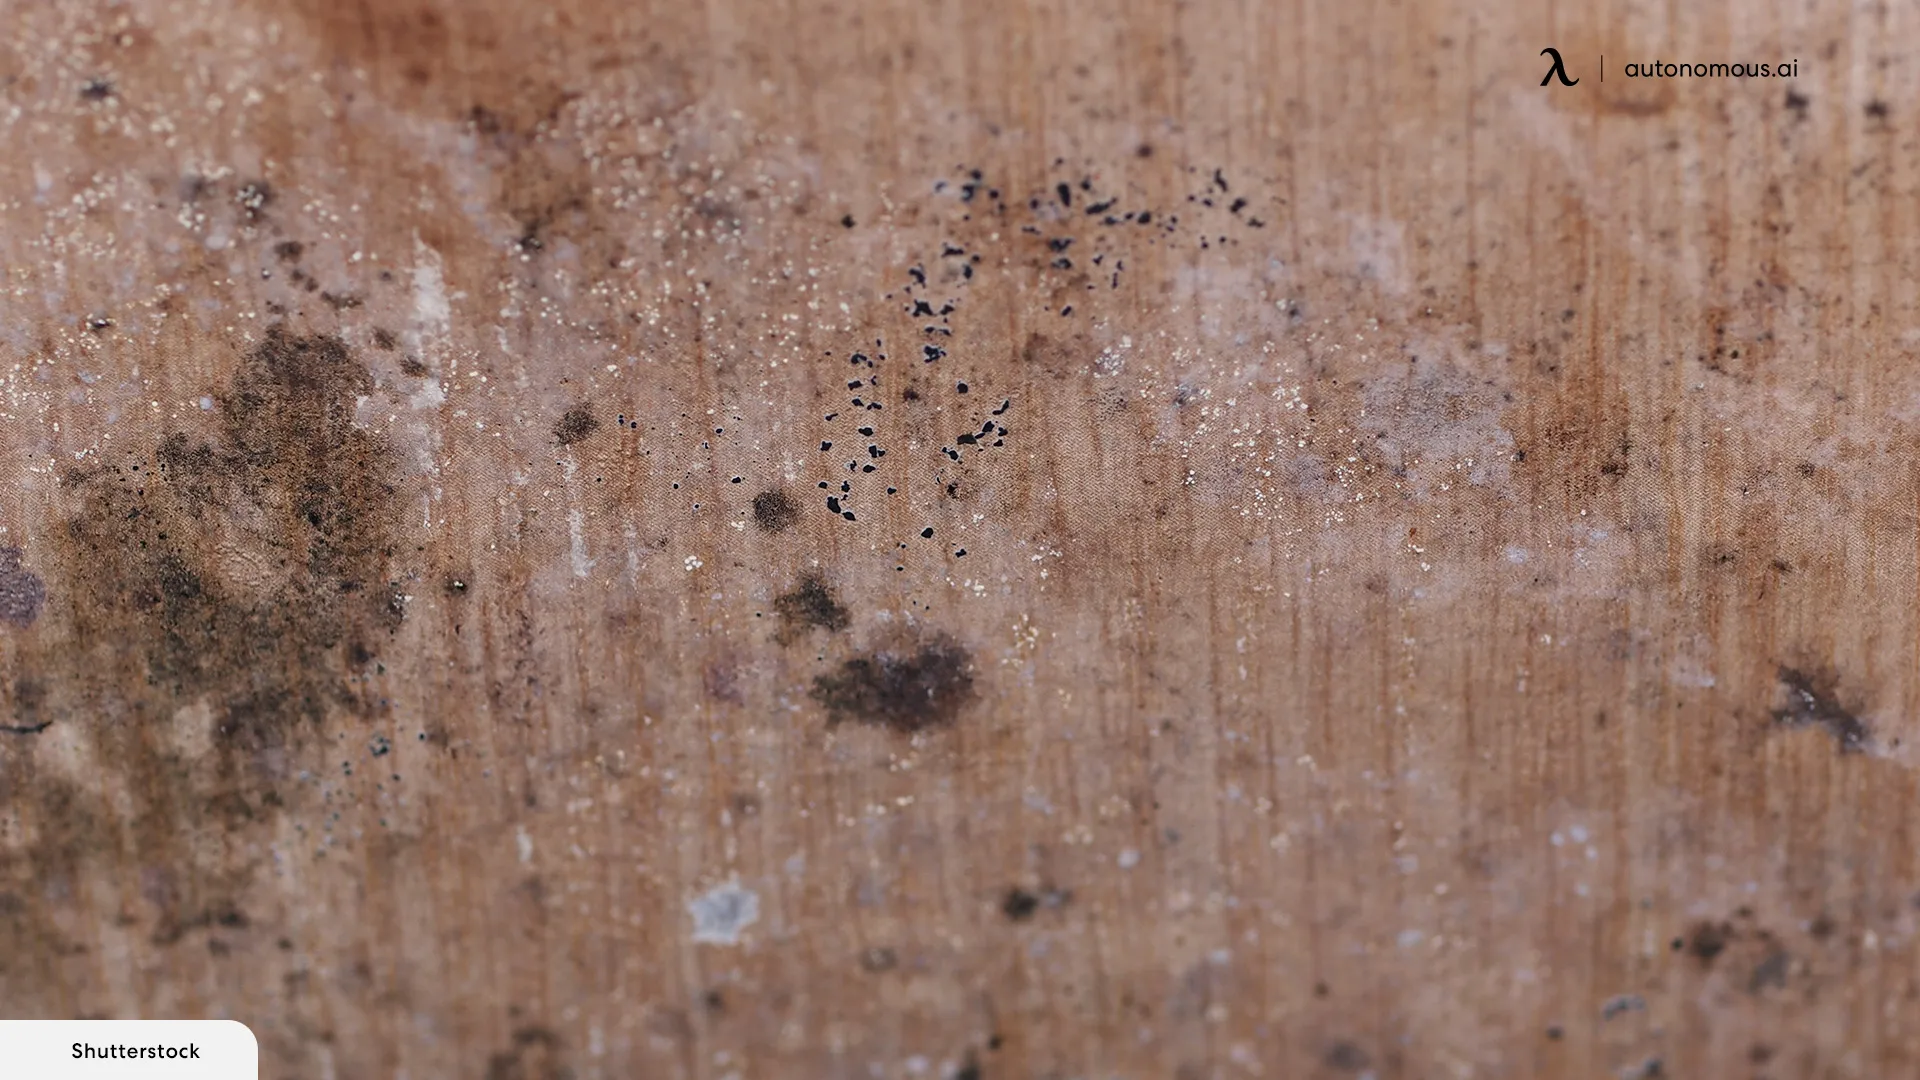 Why Does Mold Grow on Furniture?